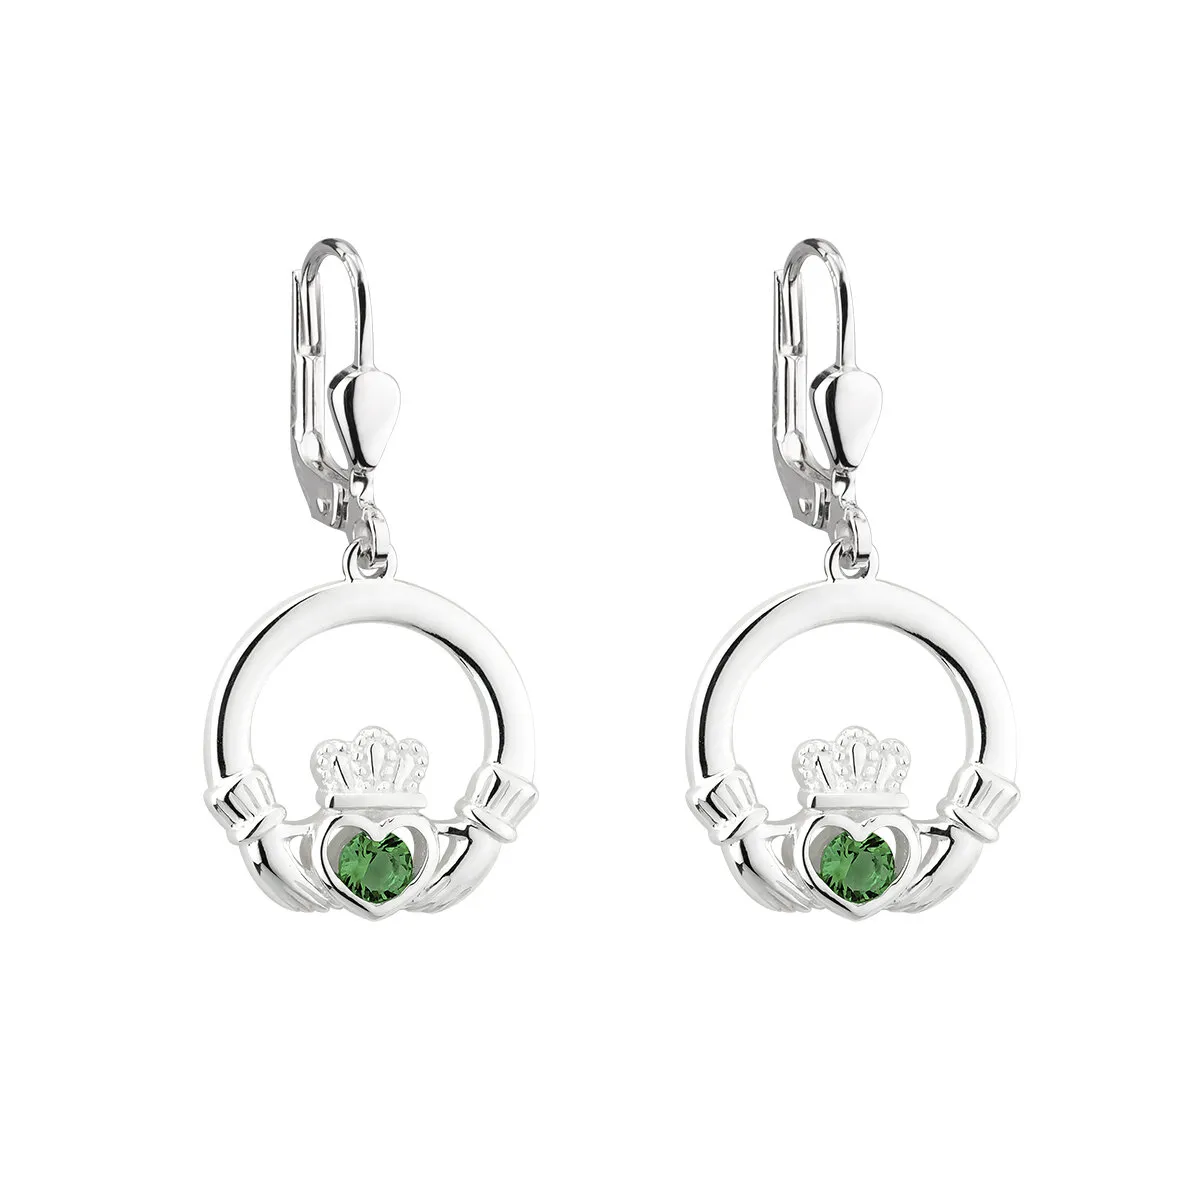 Silver Claddagh Drop Earrings With Green Crystal Centerpiece...